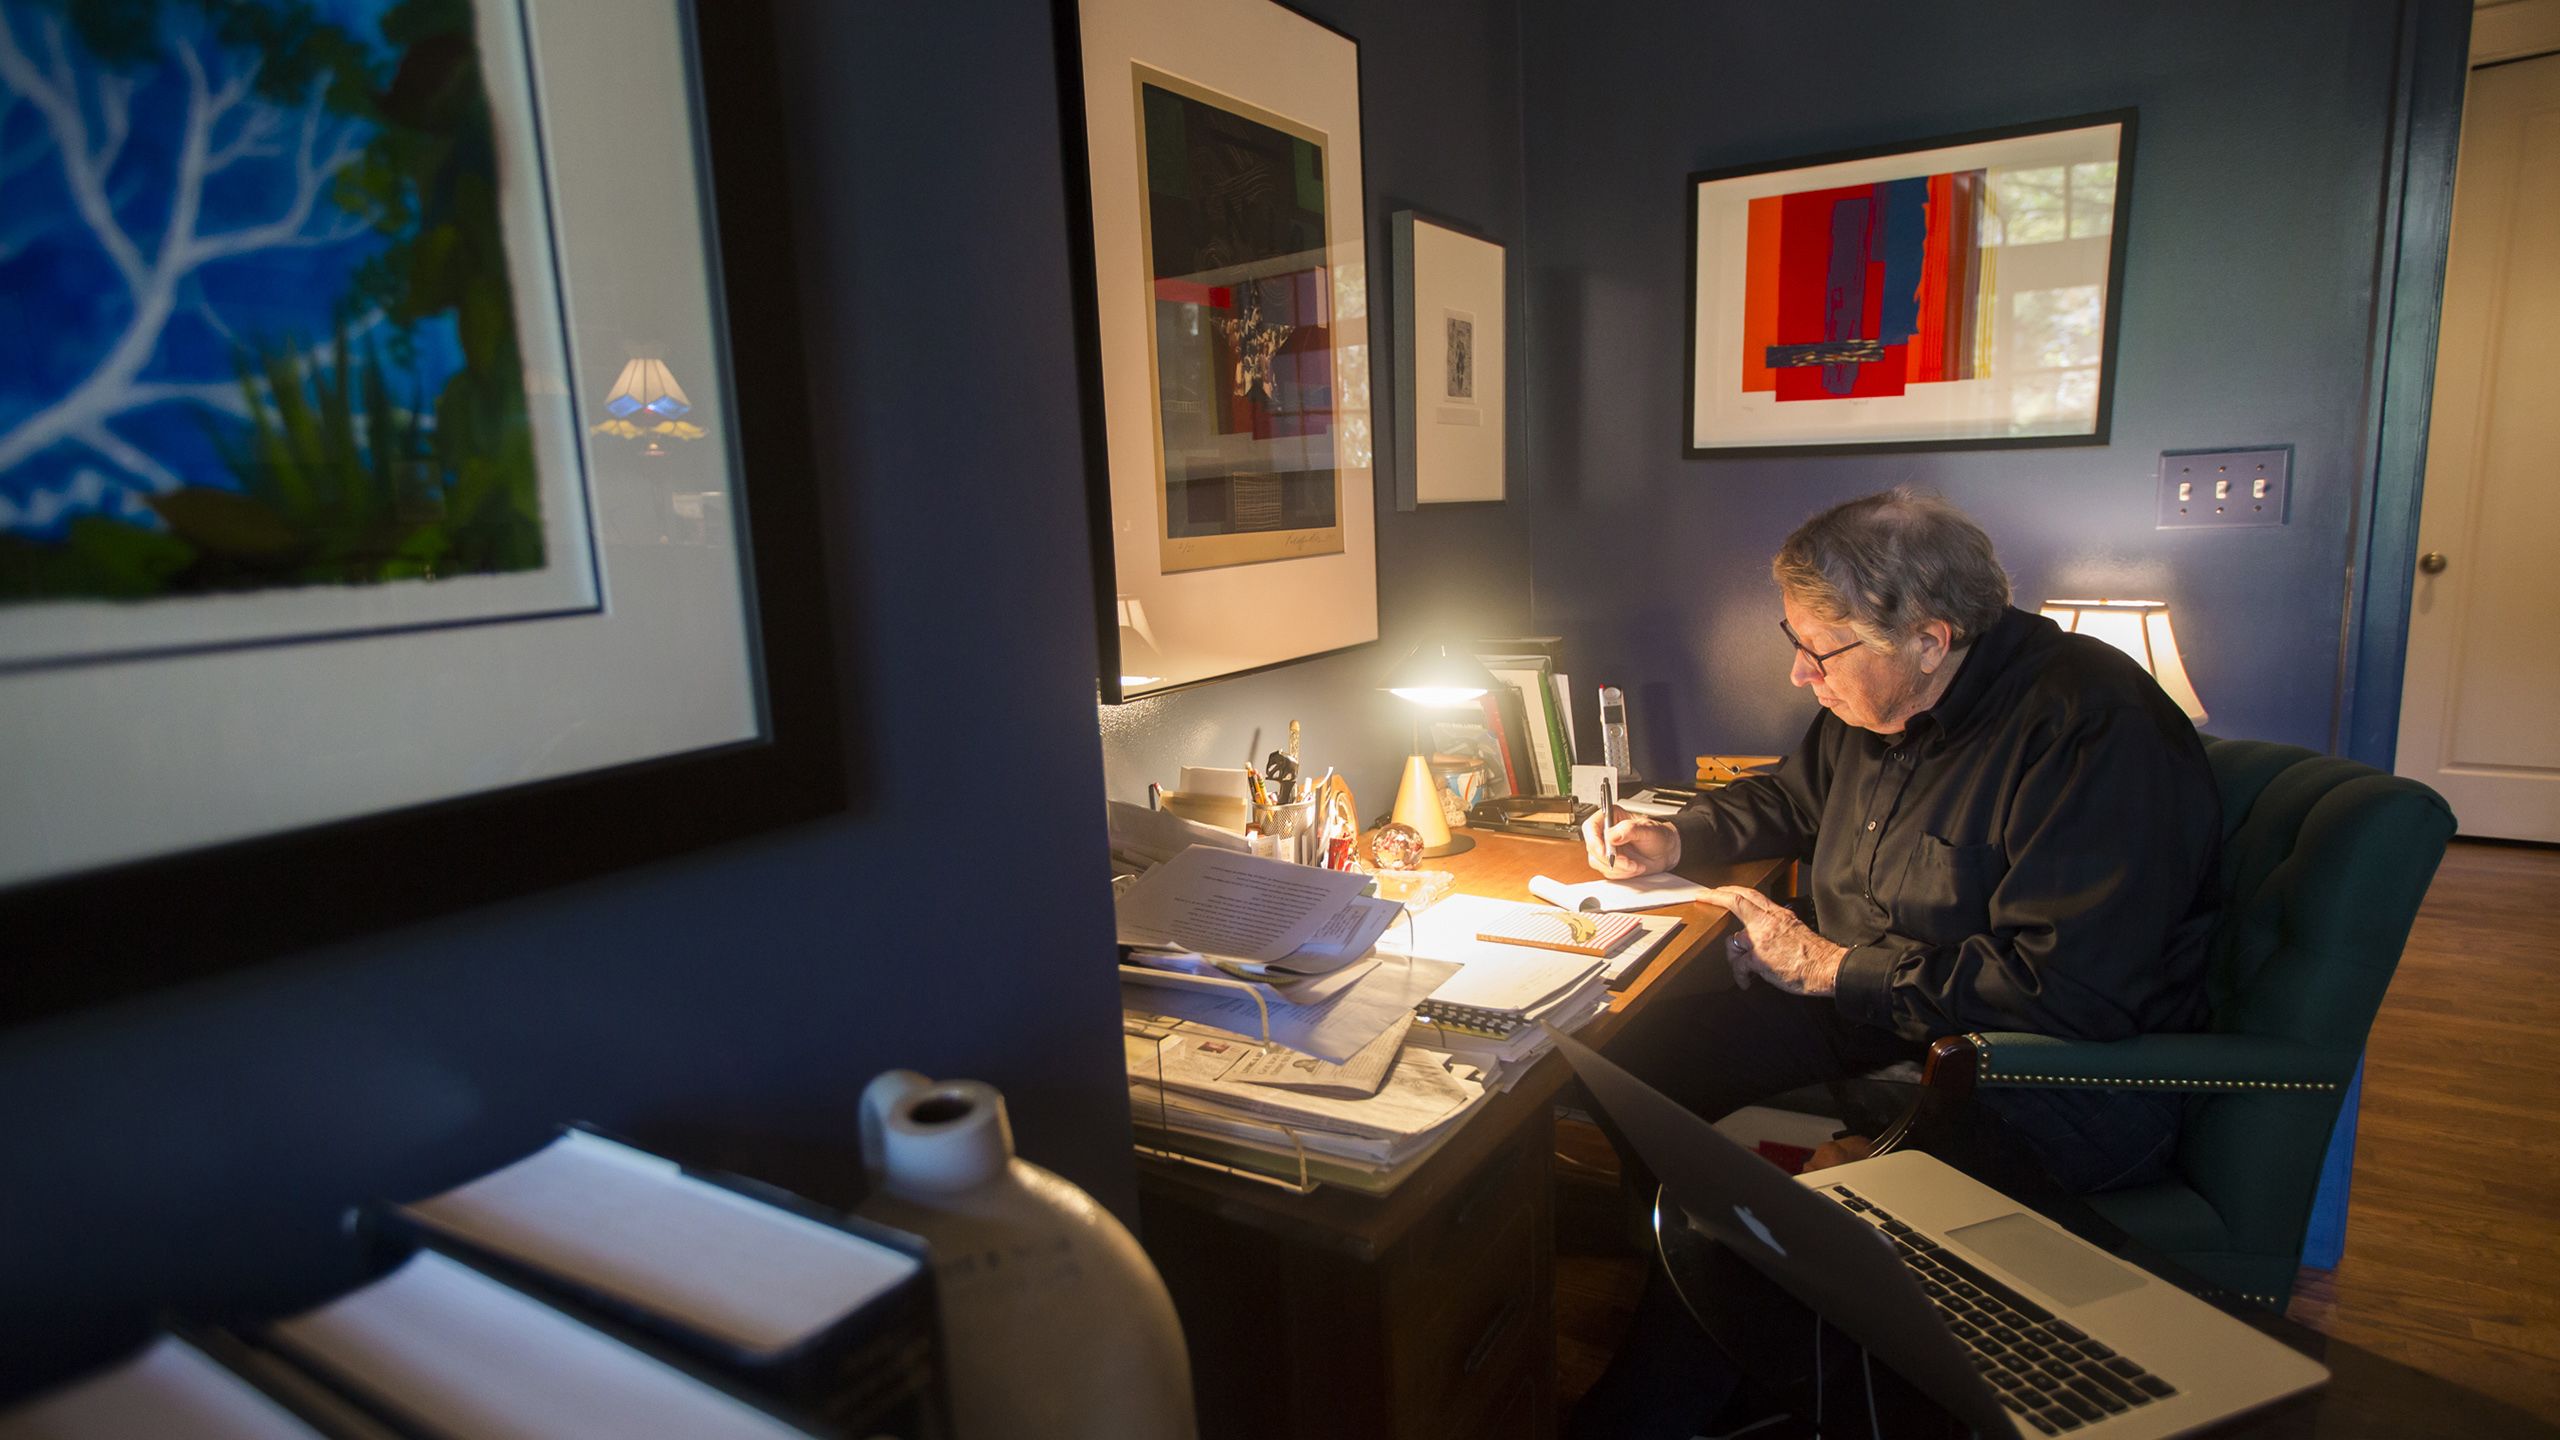 Burkett sitting at his desk writing a note, surrounded by papers with artwork on the walls